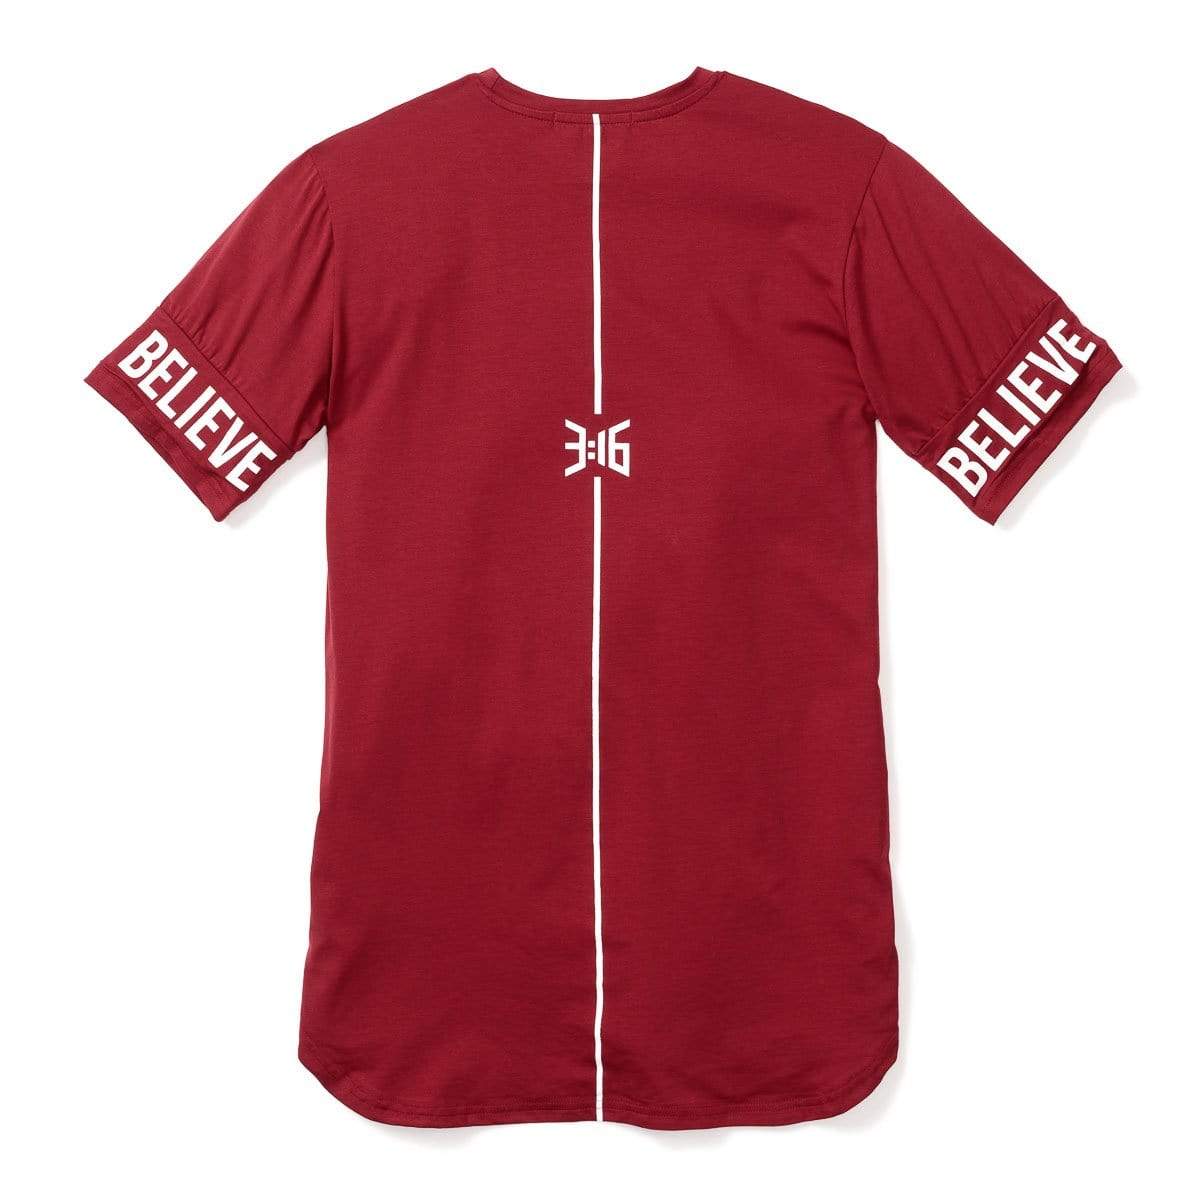 316collection Apparel 3:16 - Believe Sleeve Tee - Maroon Red